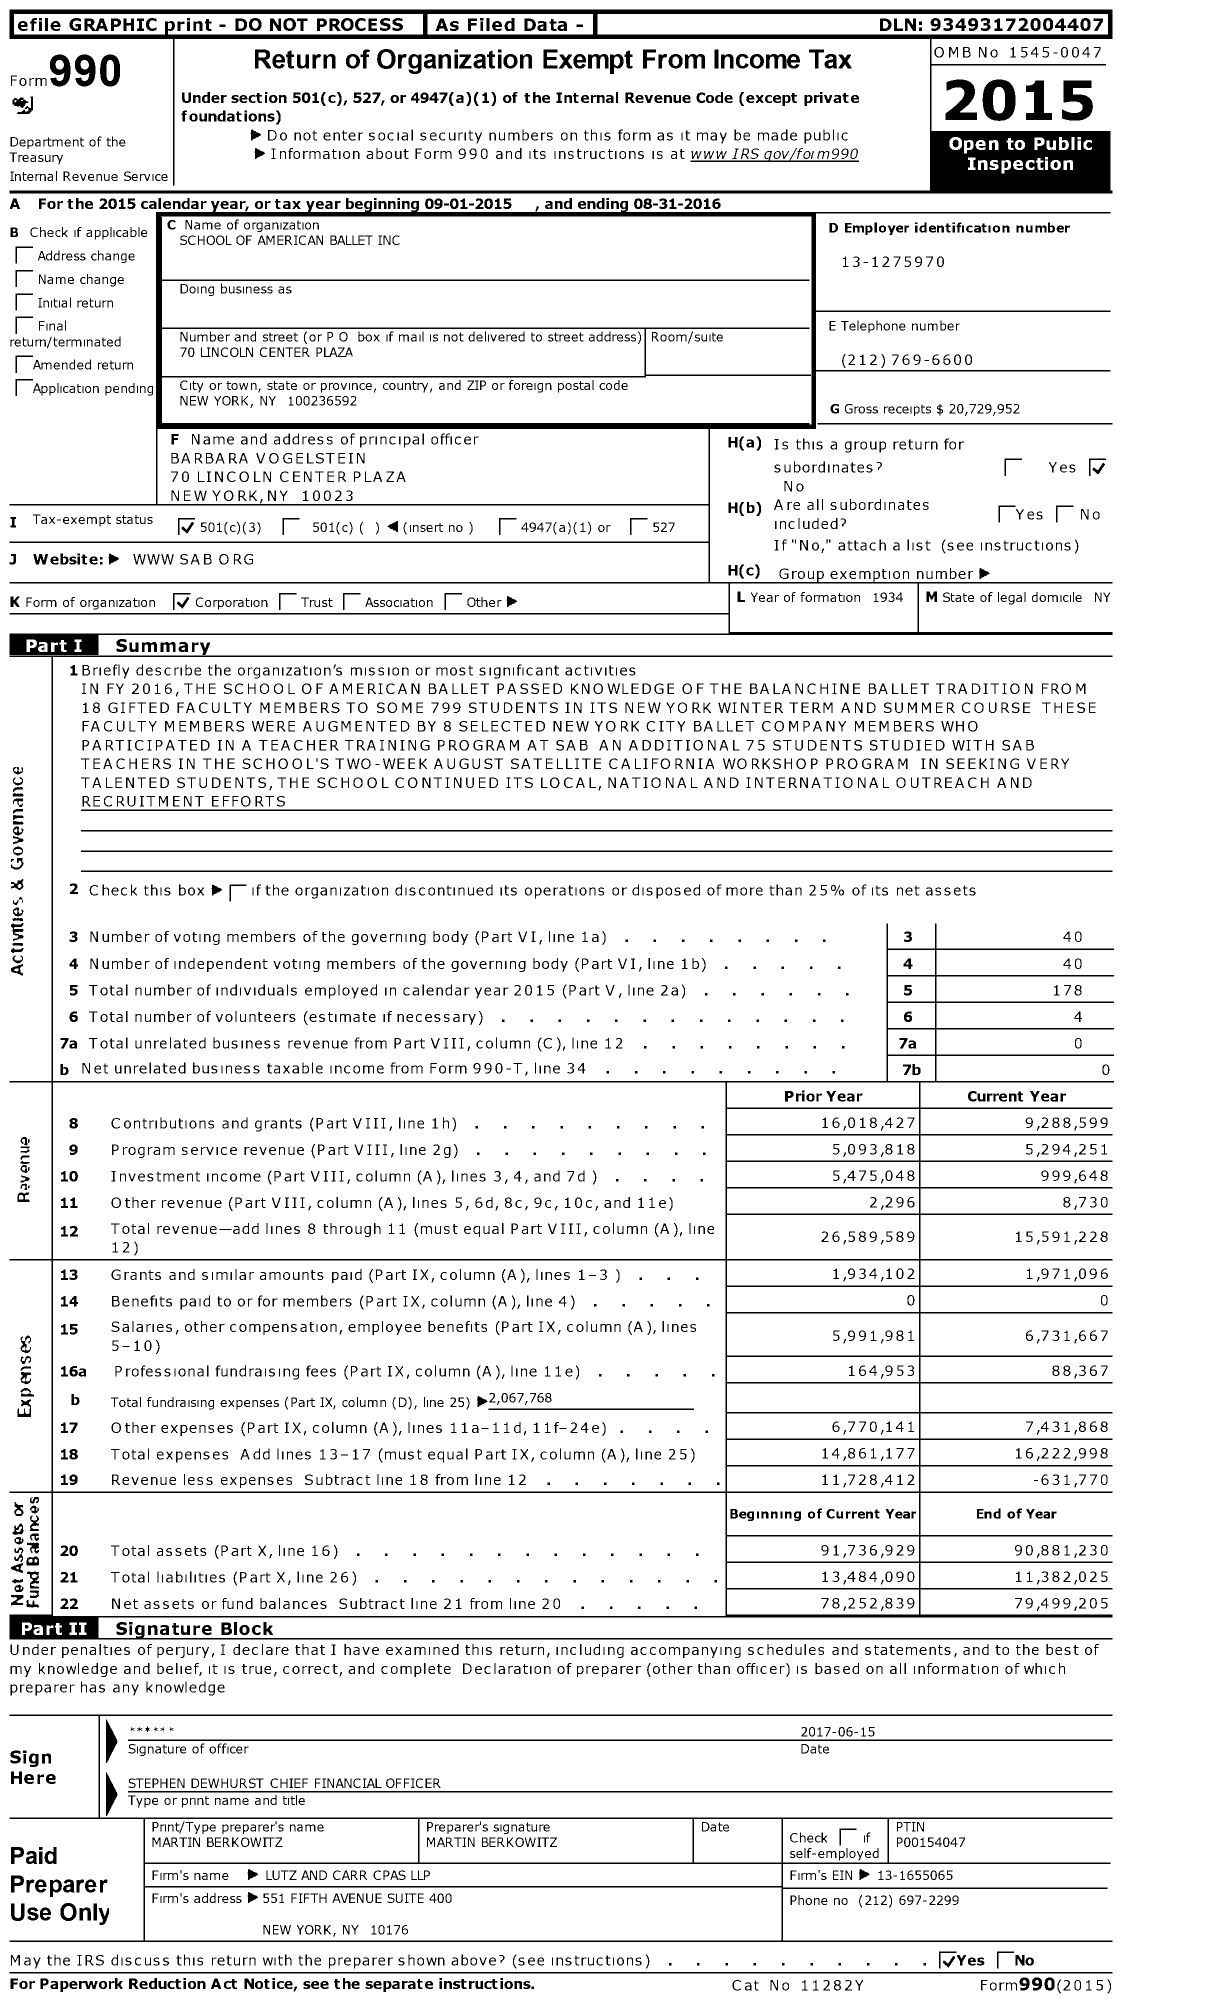 Image of first page of 2015 Form 990 for The School of American Ballet (SAB)